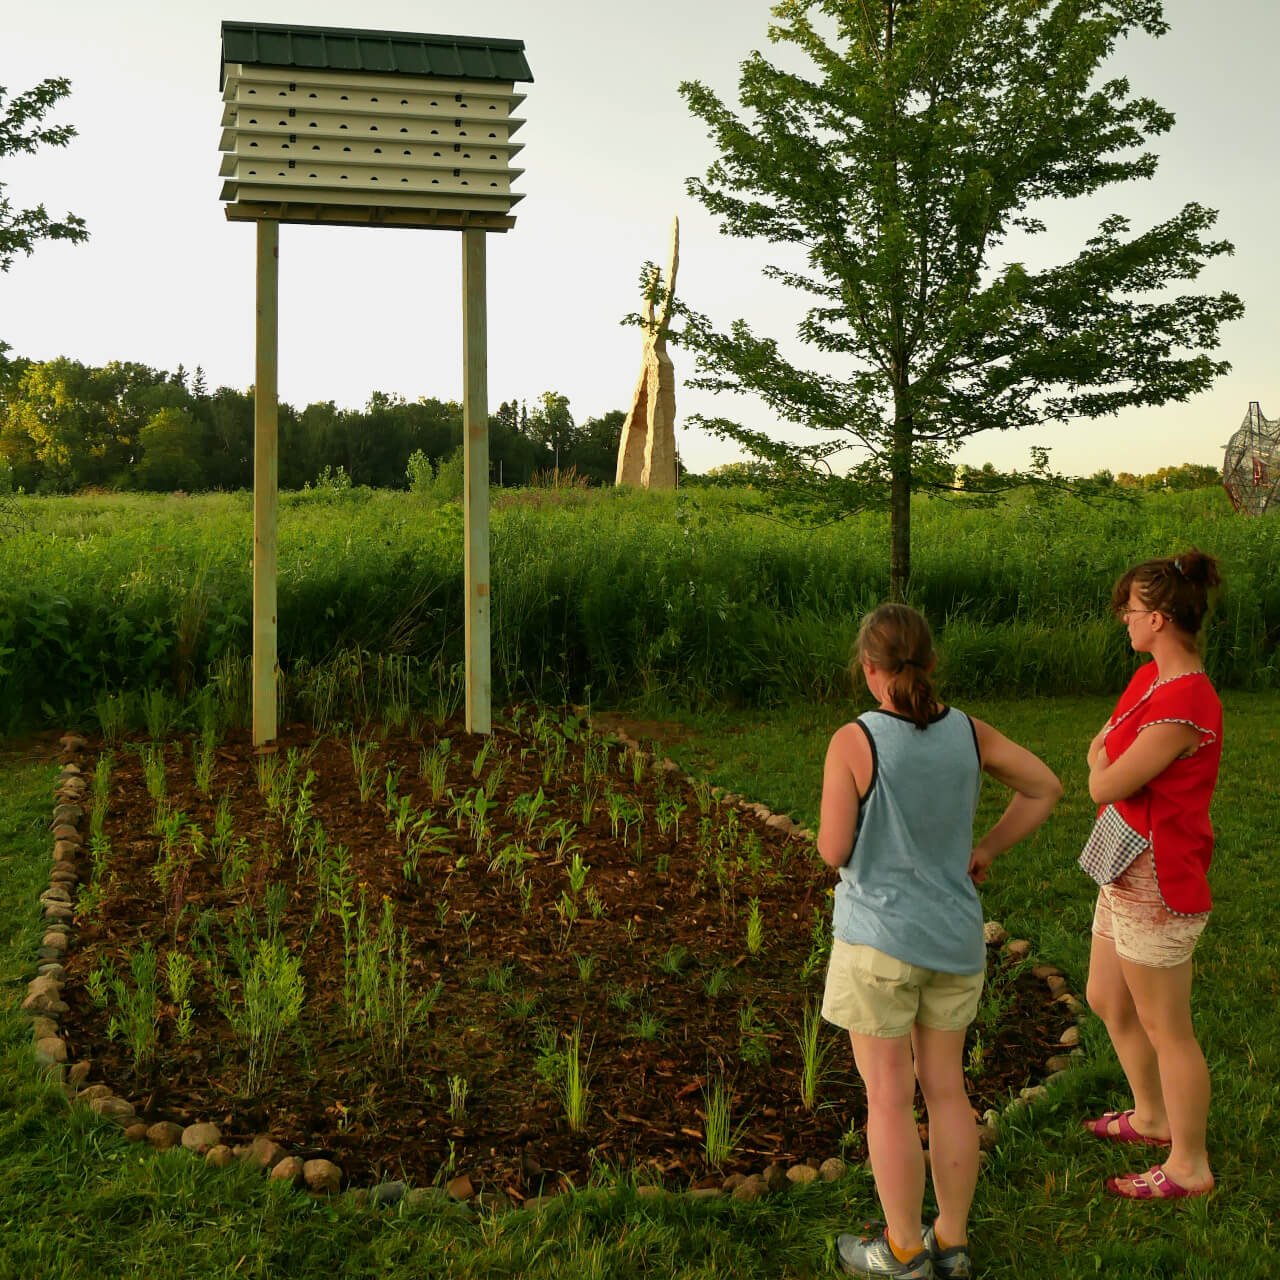 Two people stare at rows of plants in the shape of a basketball free throw lane with a purple martin house instead of a backboard and hoop